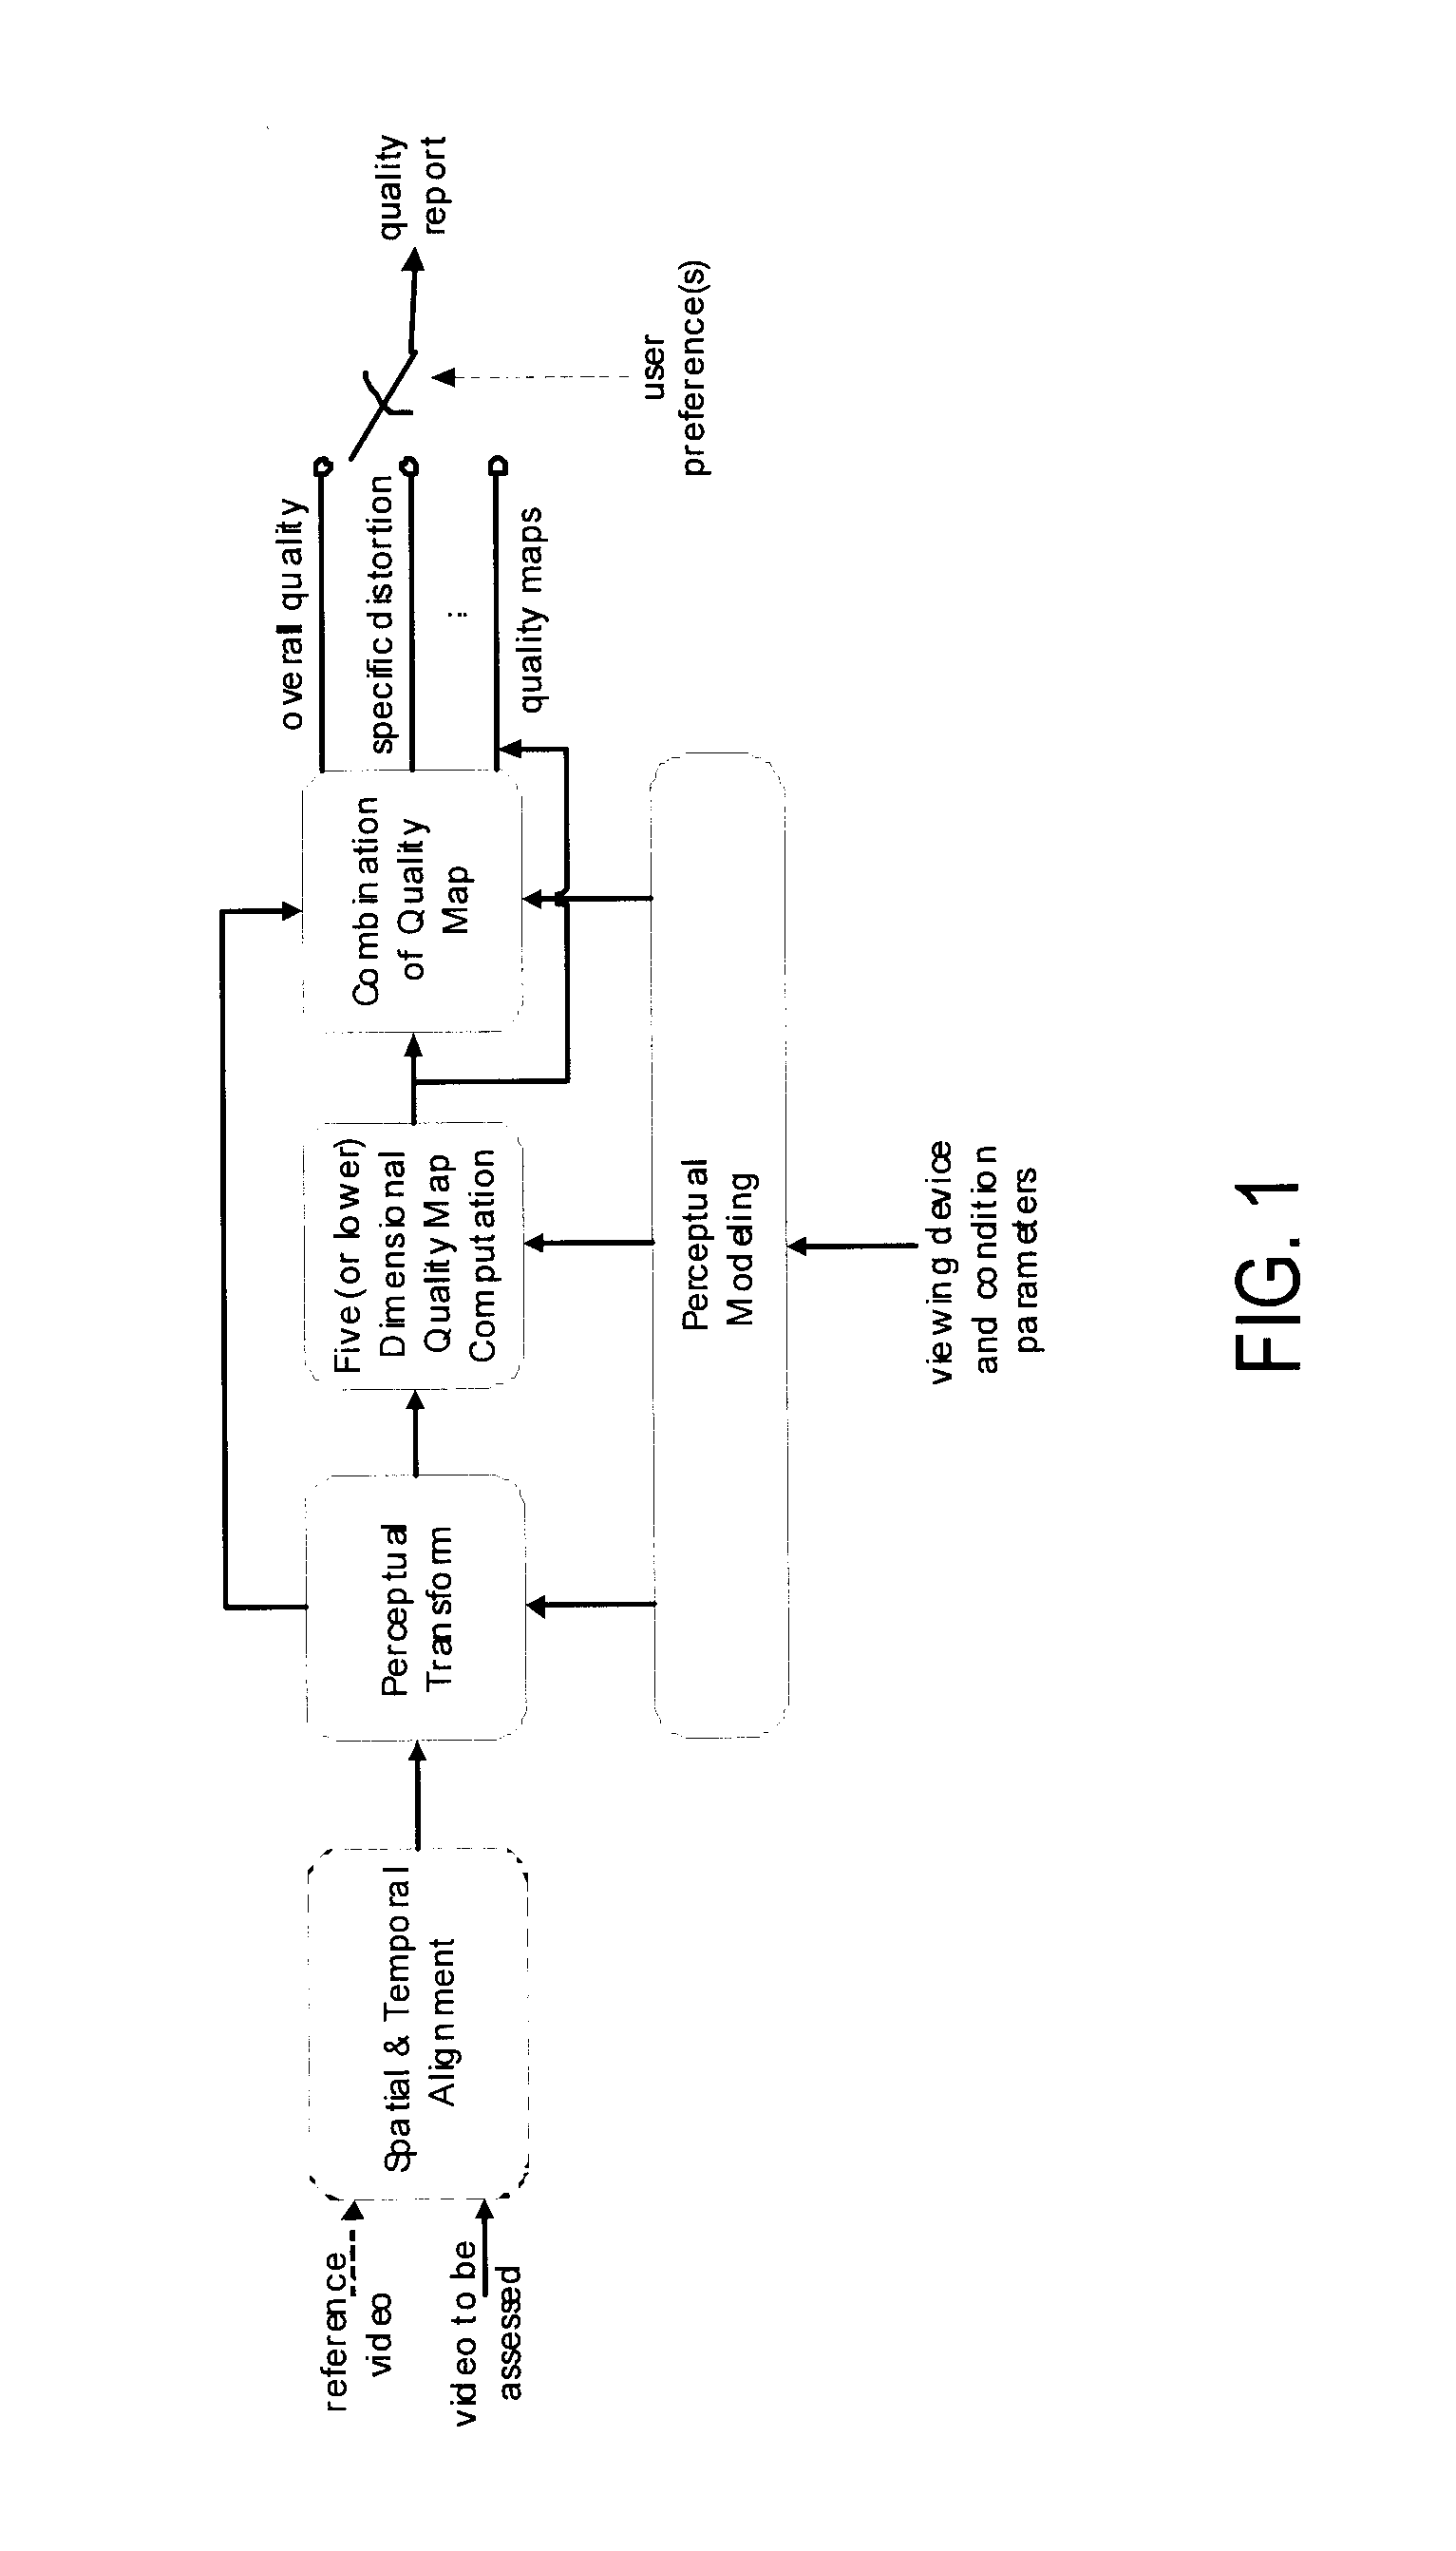 Method and system for objective perceptual video quality assessment